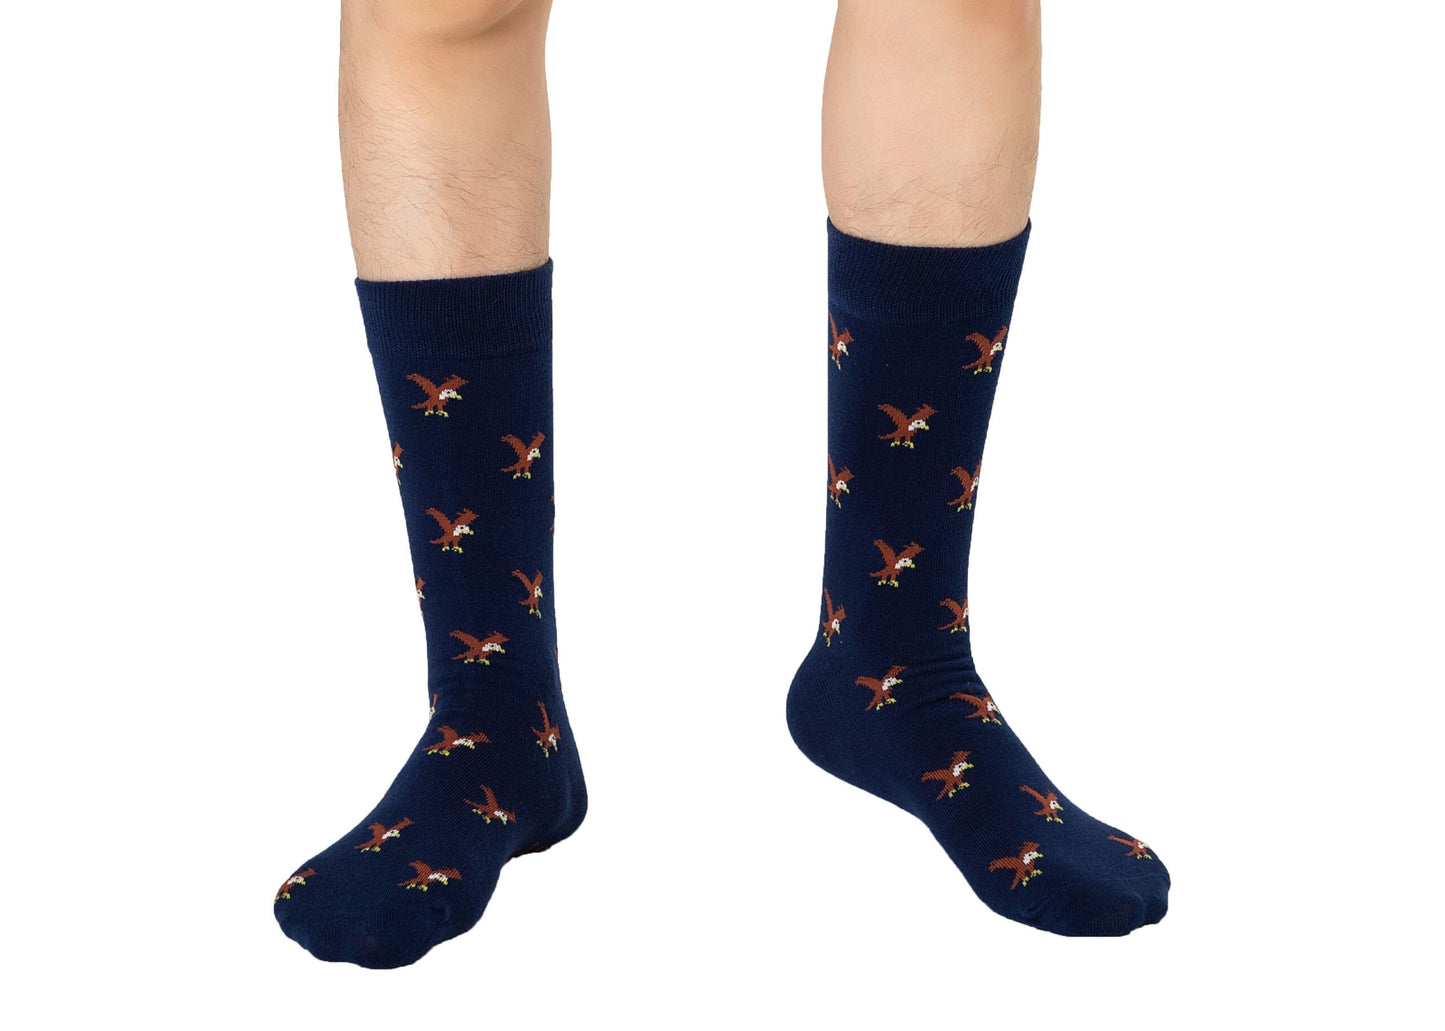 A man wearing a pair of Eagle Socks.